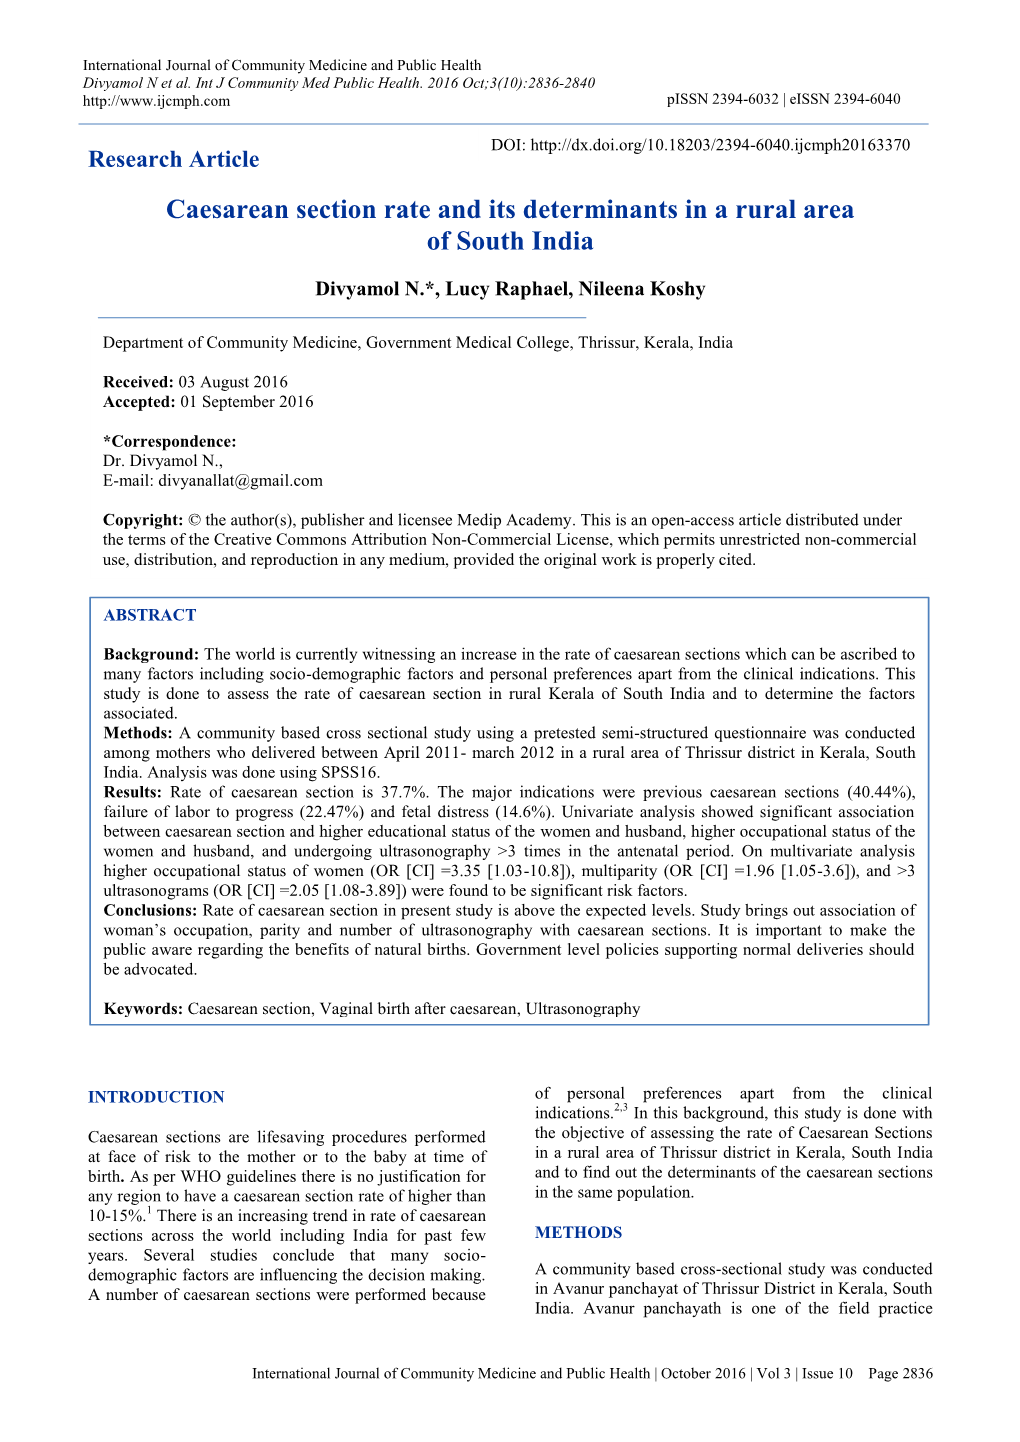 Caesarean Section Rate and Its Determinants in a Rural Area of South India